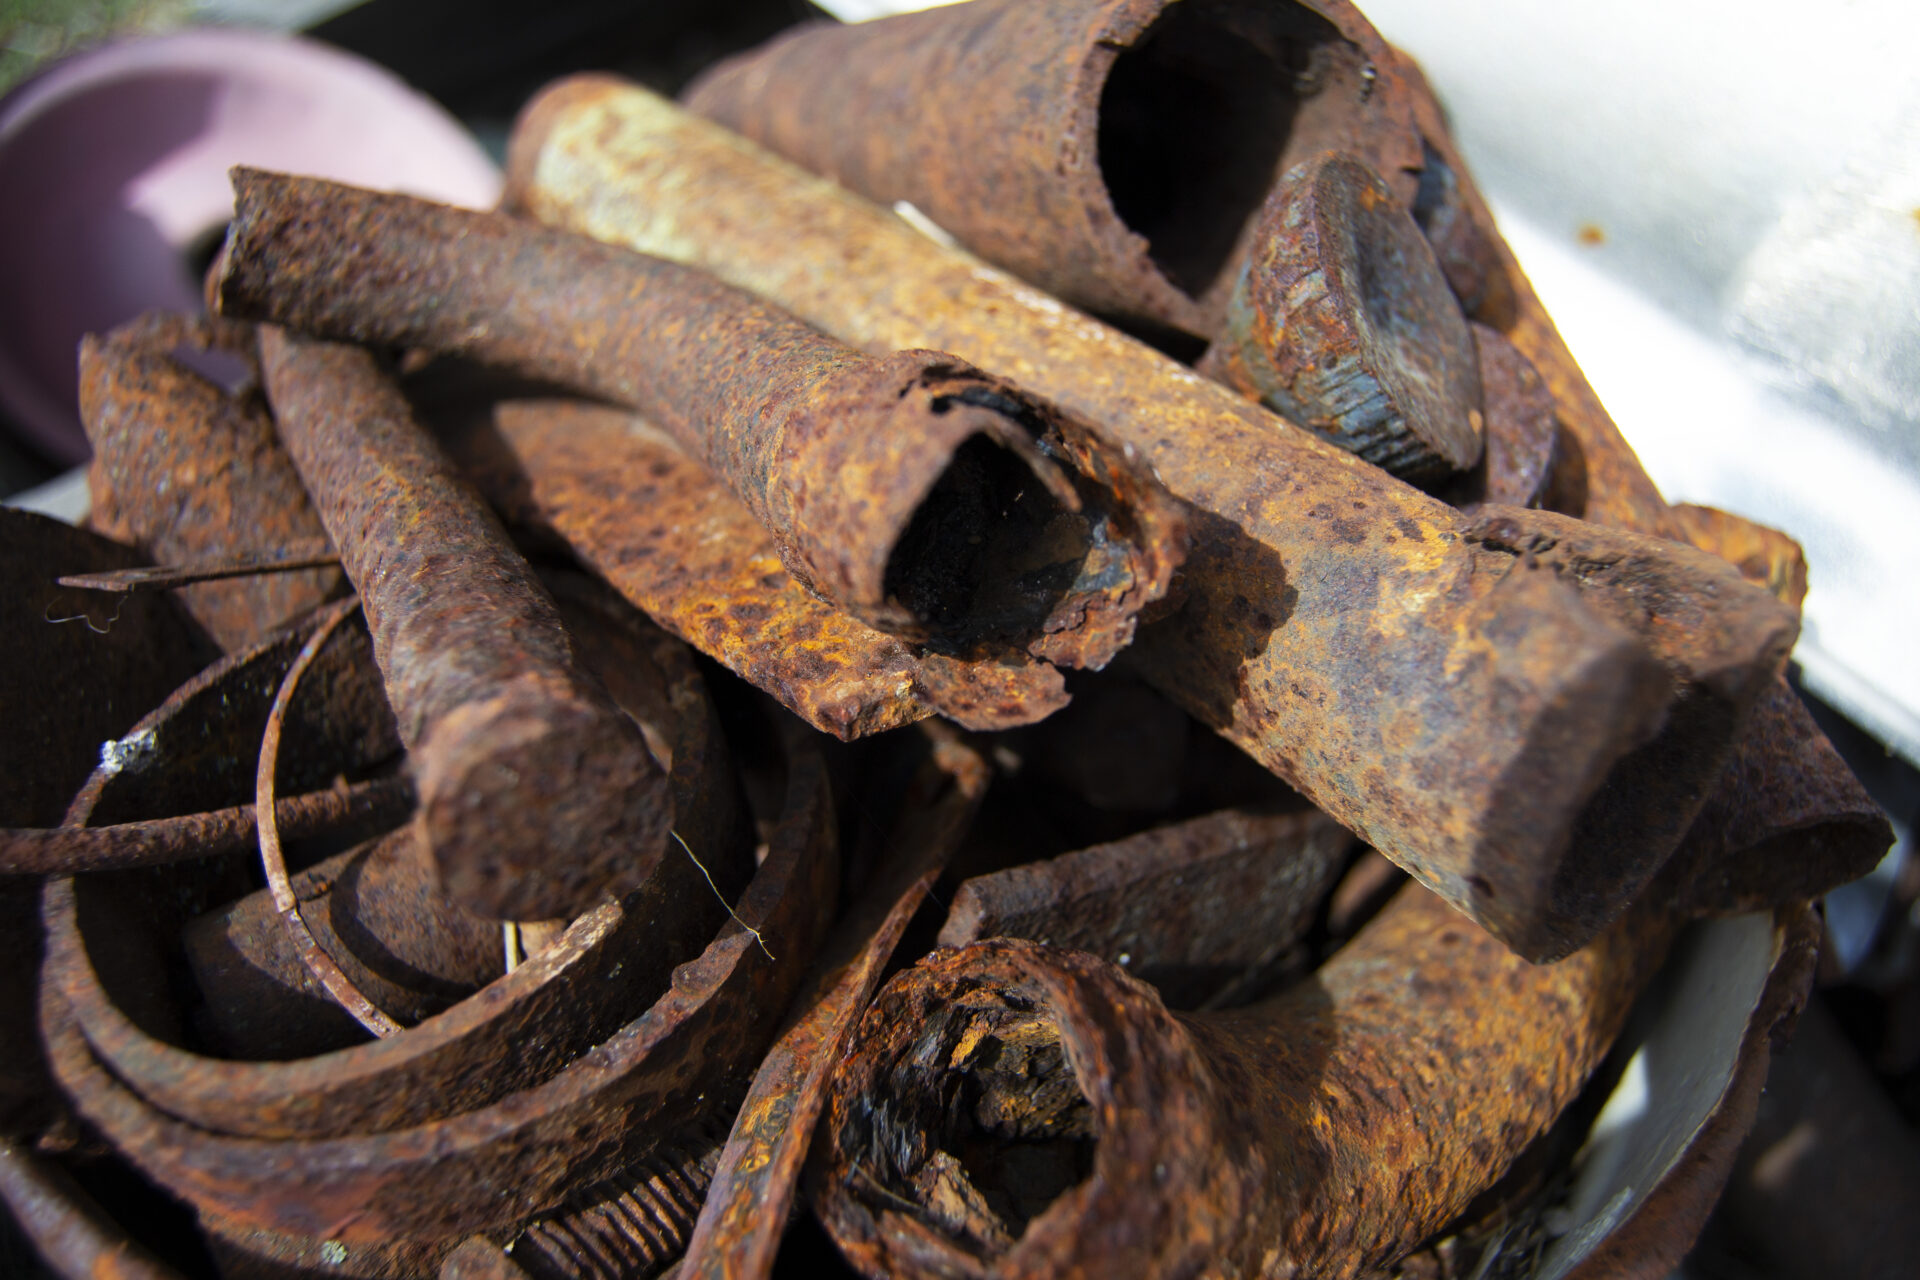 Dirty or rusted metal separate from other scrap metal